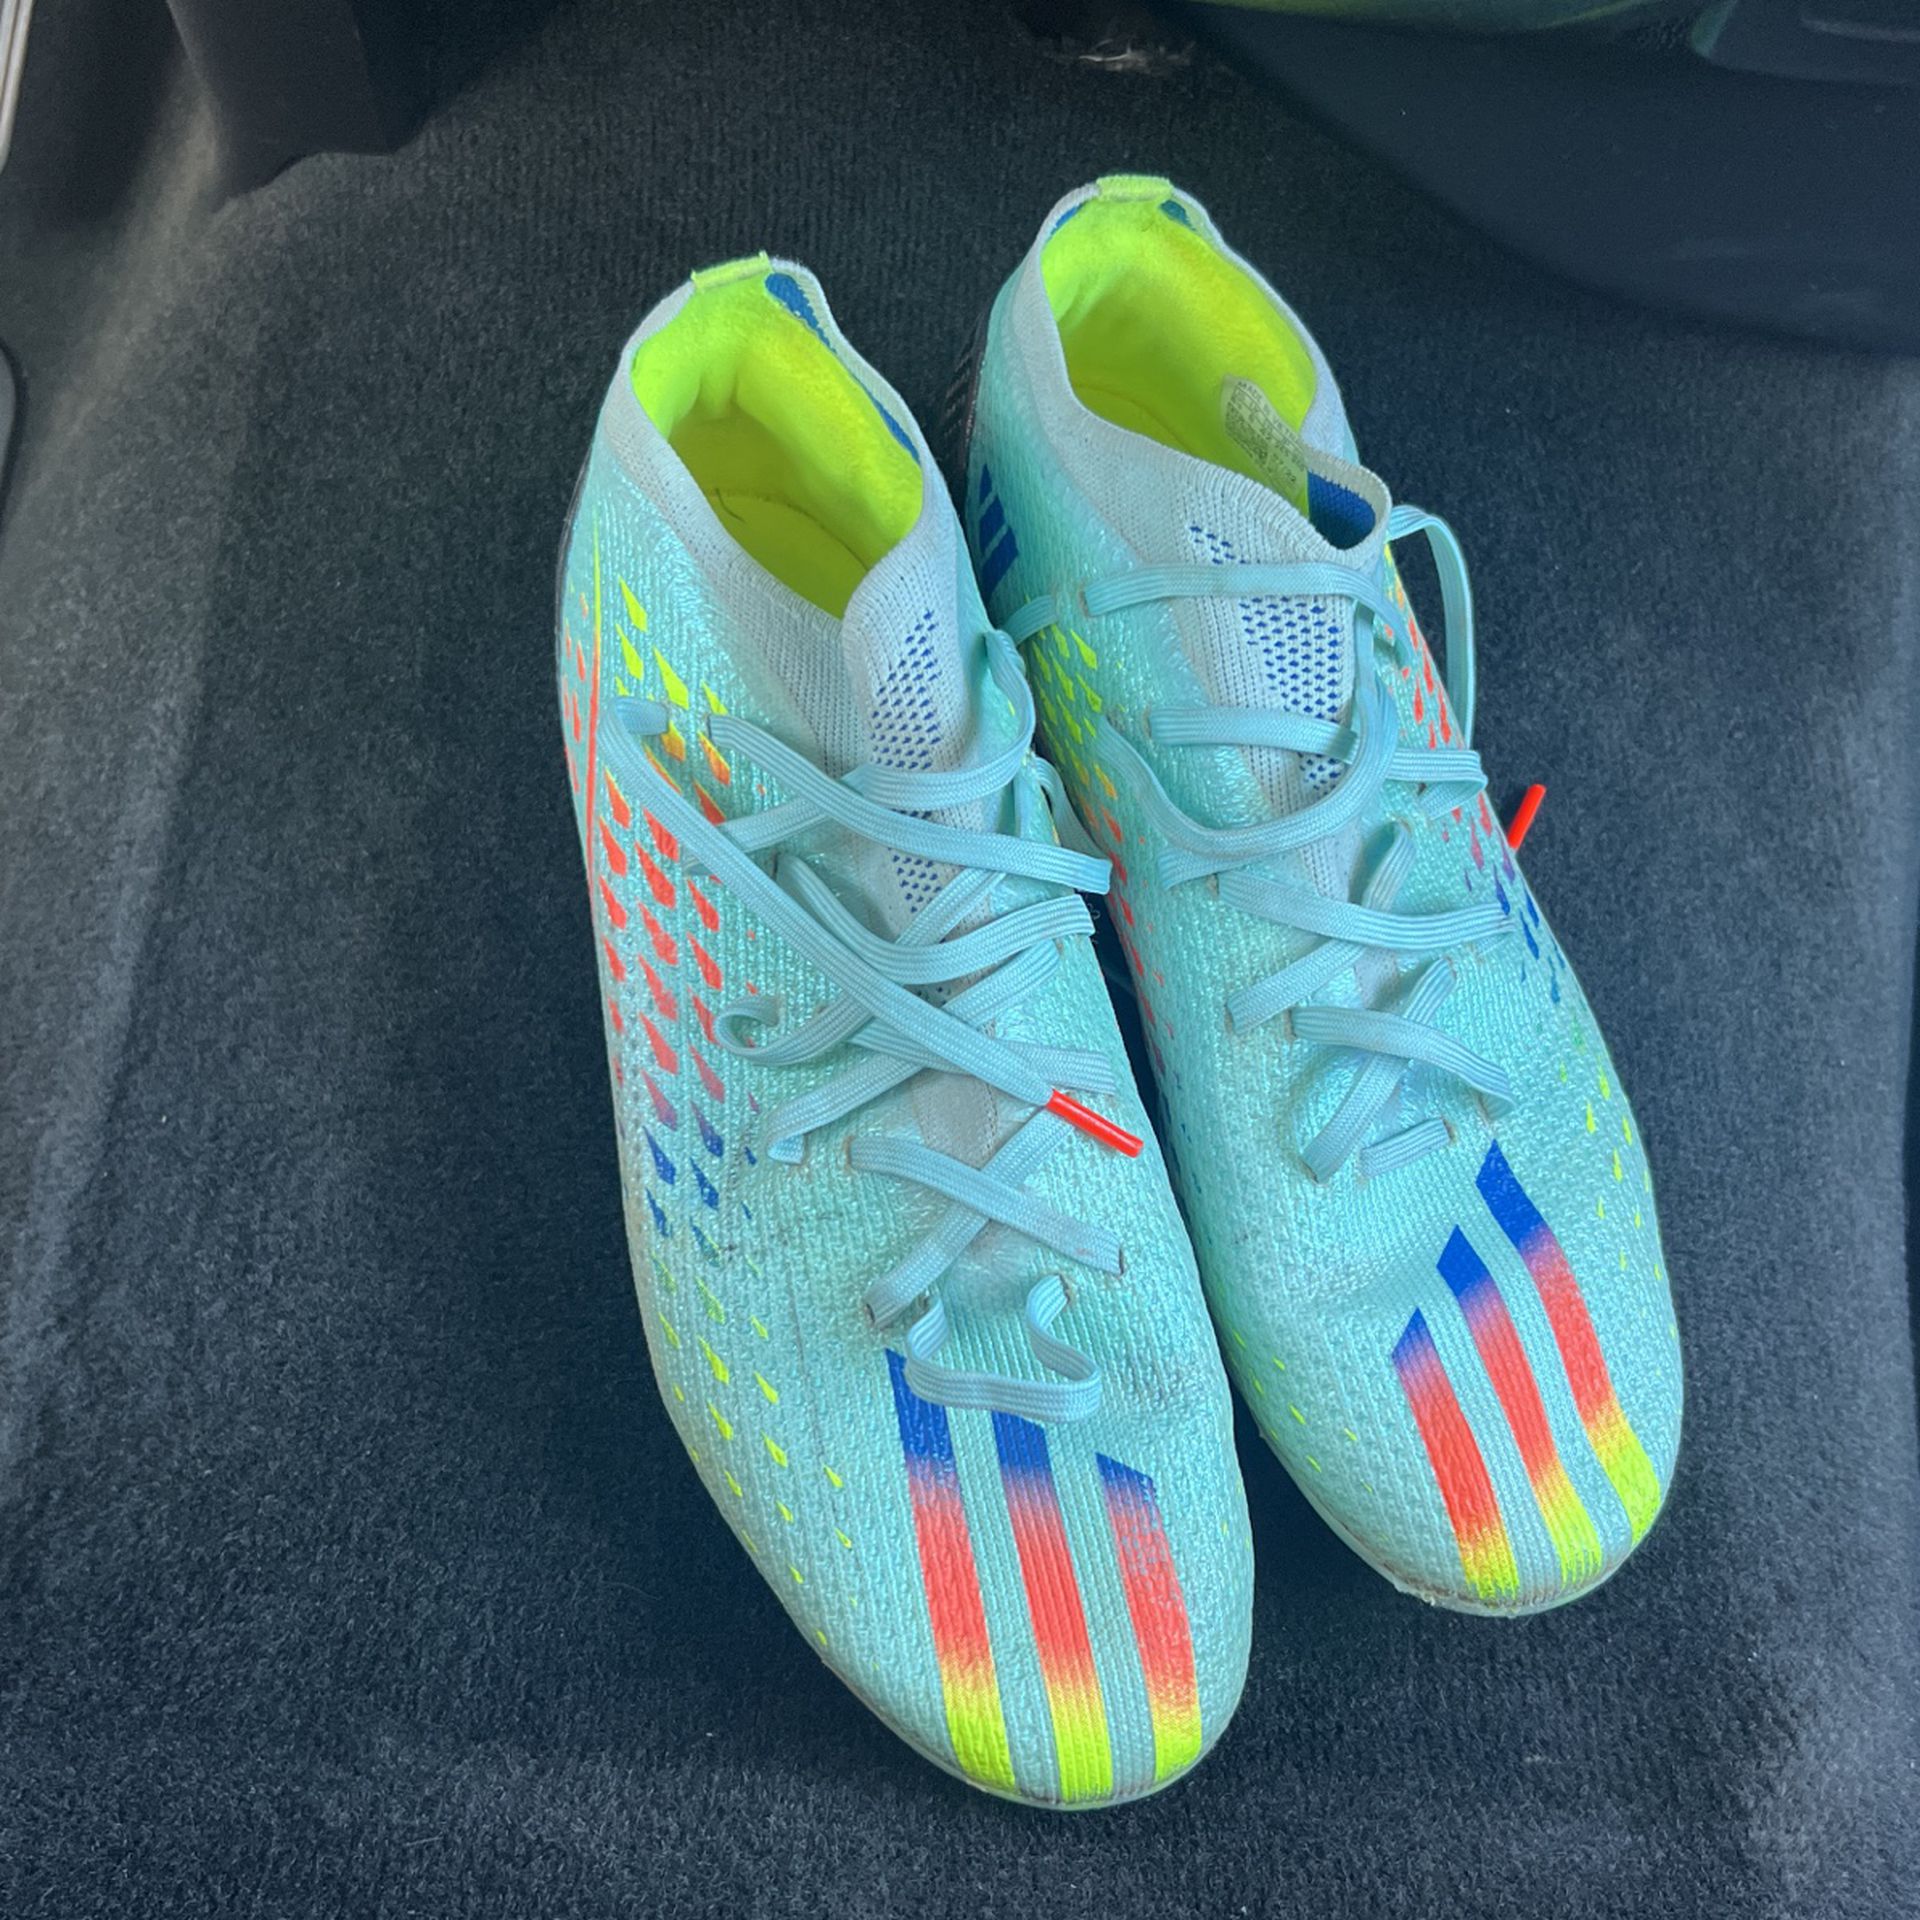 Adidas Cleats Size 8.5 for Sale in Arlington, TX - OfferUp